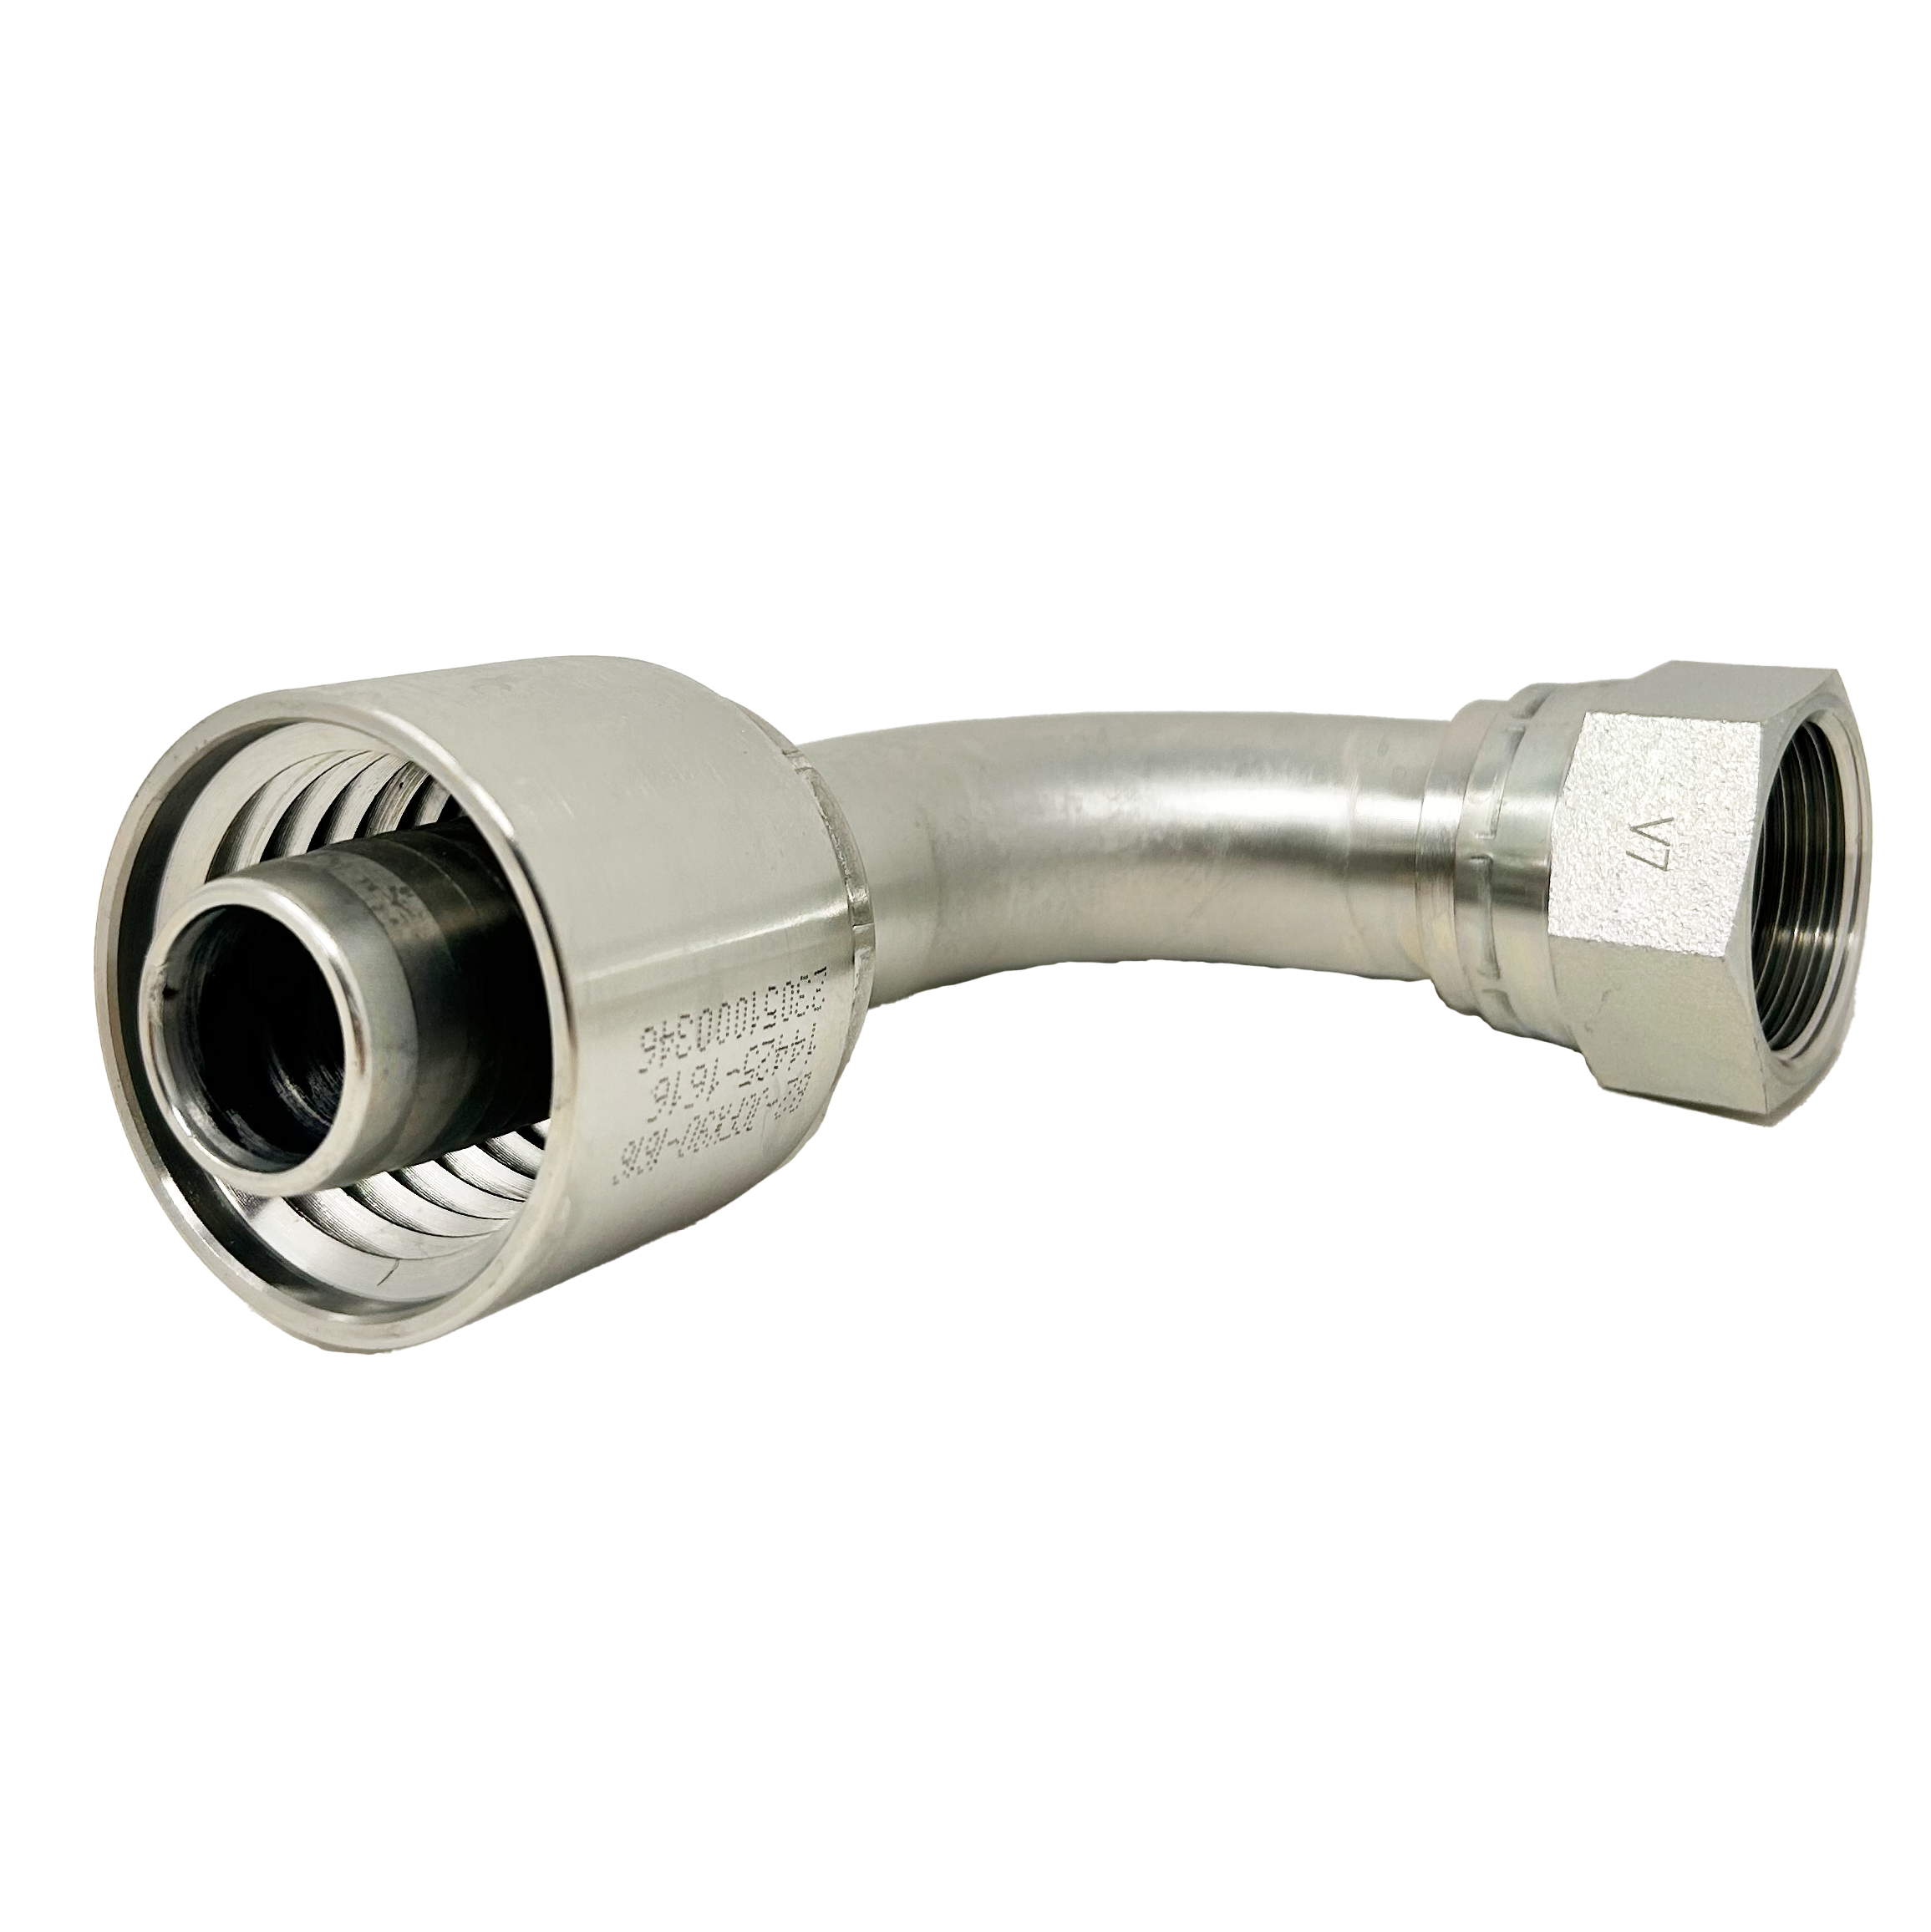 B2-JCFX90-0608S: Continental Hose Fitting, 0.375 (3/8") Hose ID x 3/4-16 Female JIC, 90-Degree Swivel Connection